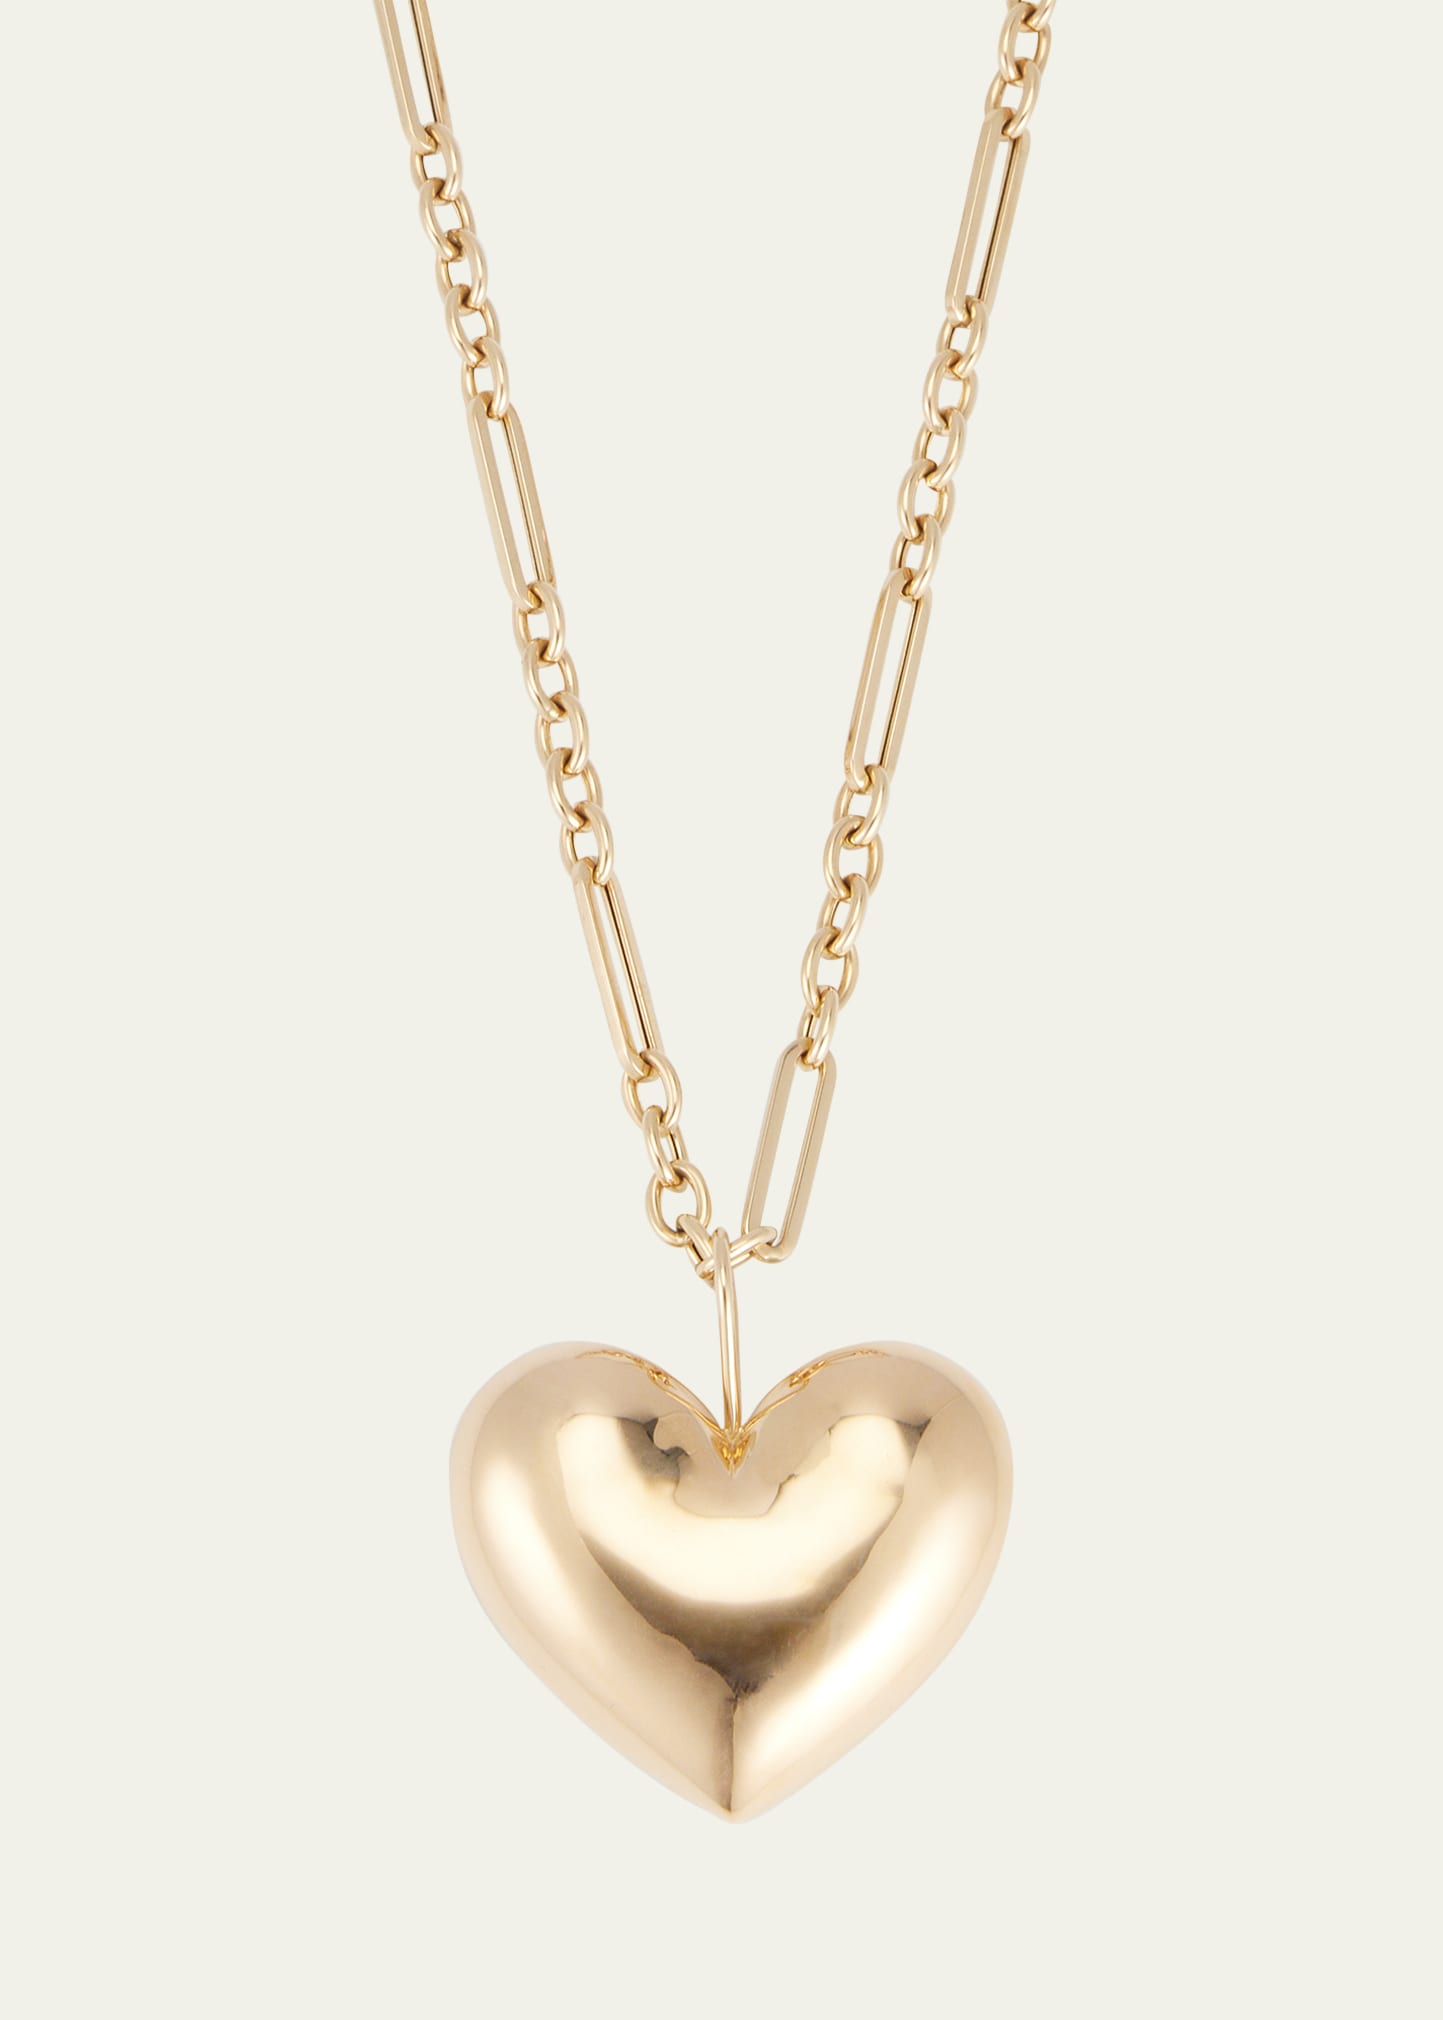 Brent Neale All Gold Puff Heart Pendant On Chain Necklace, 18"l In Yg